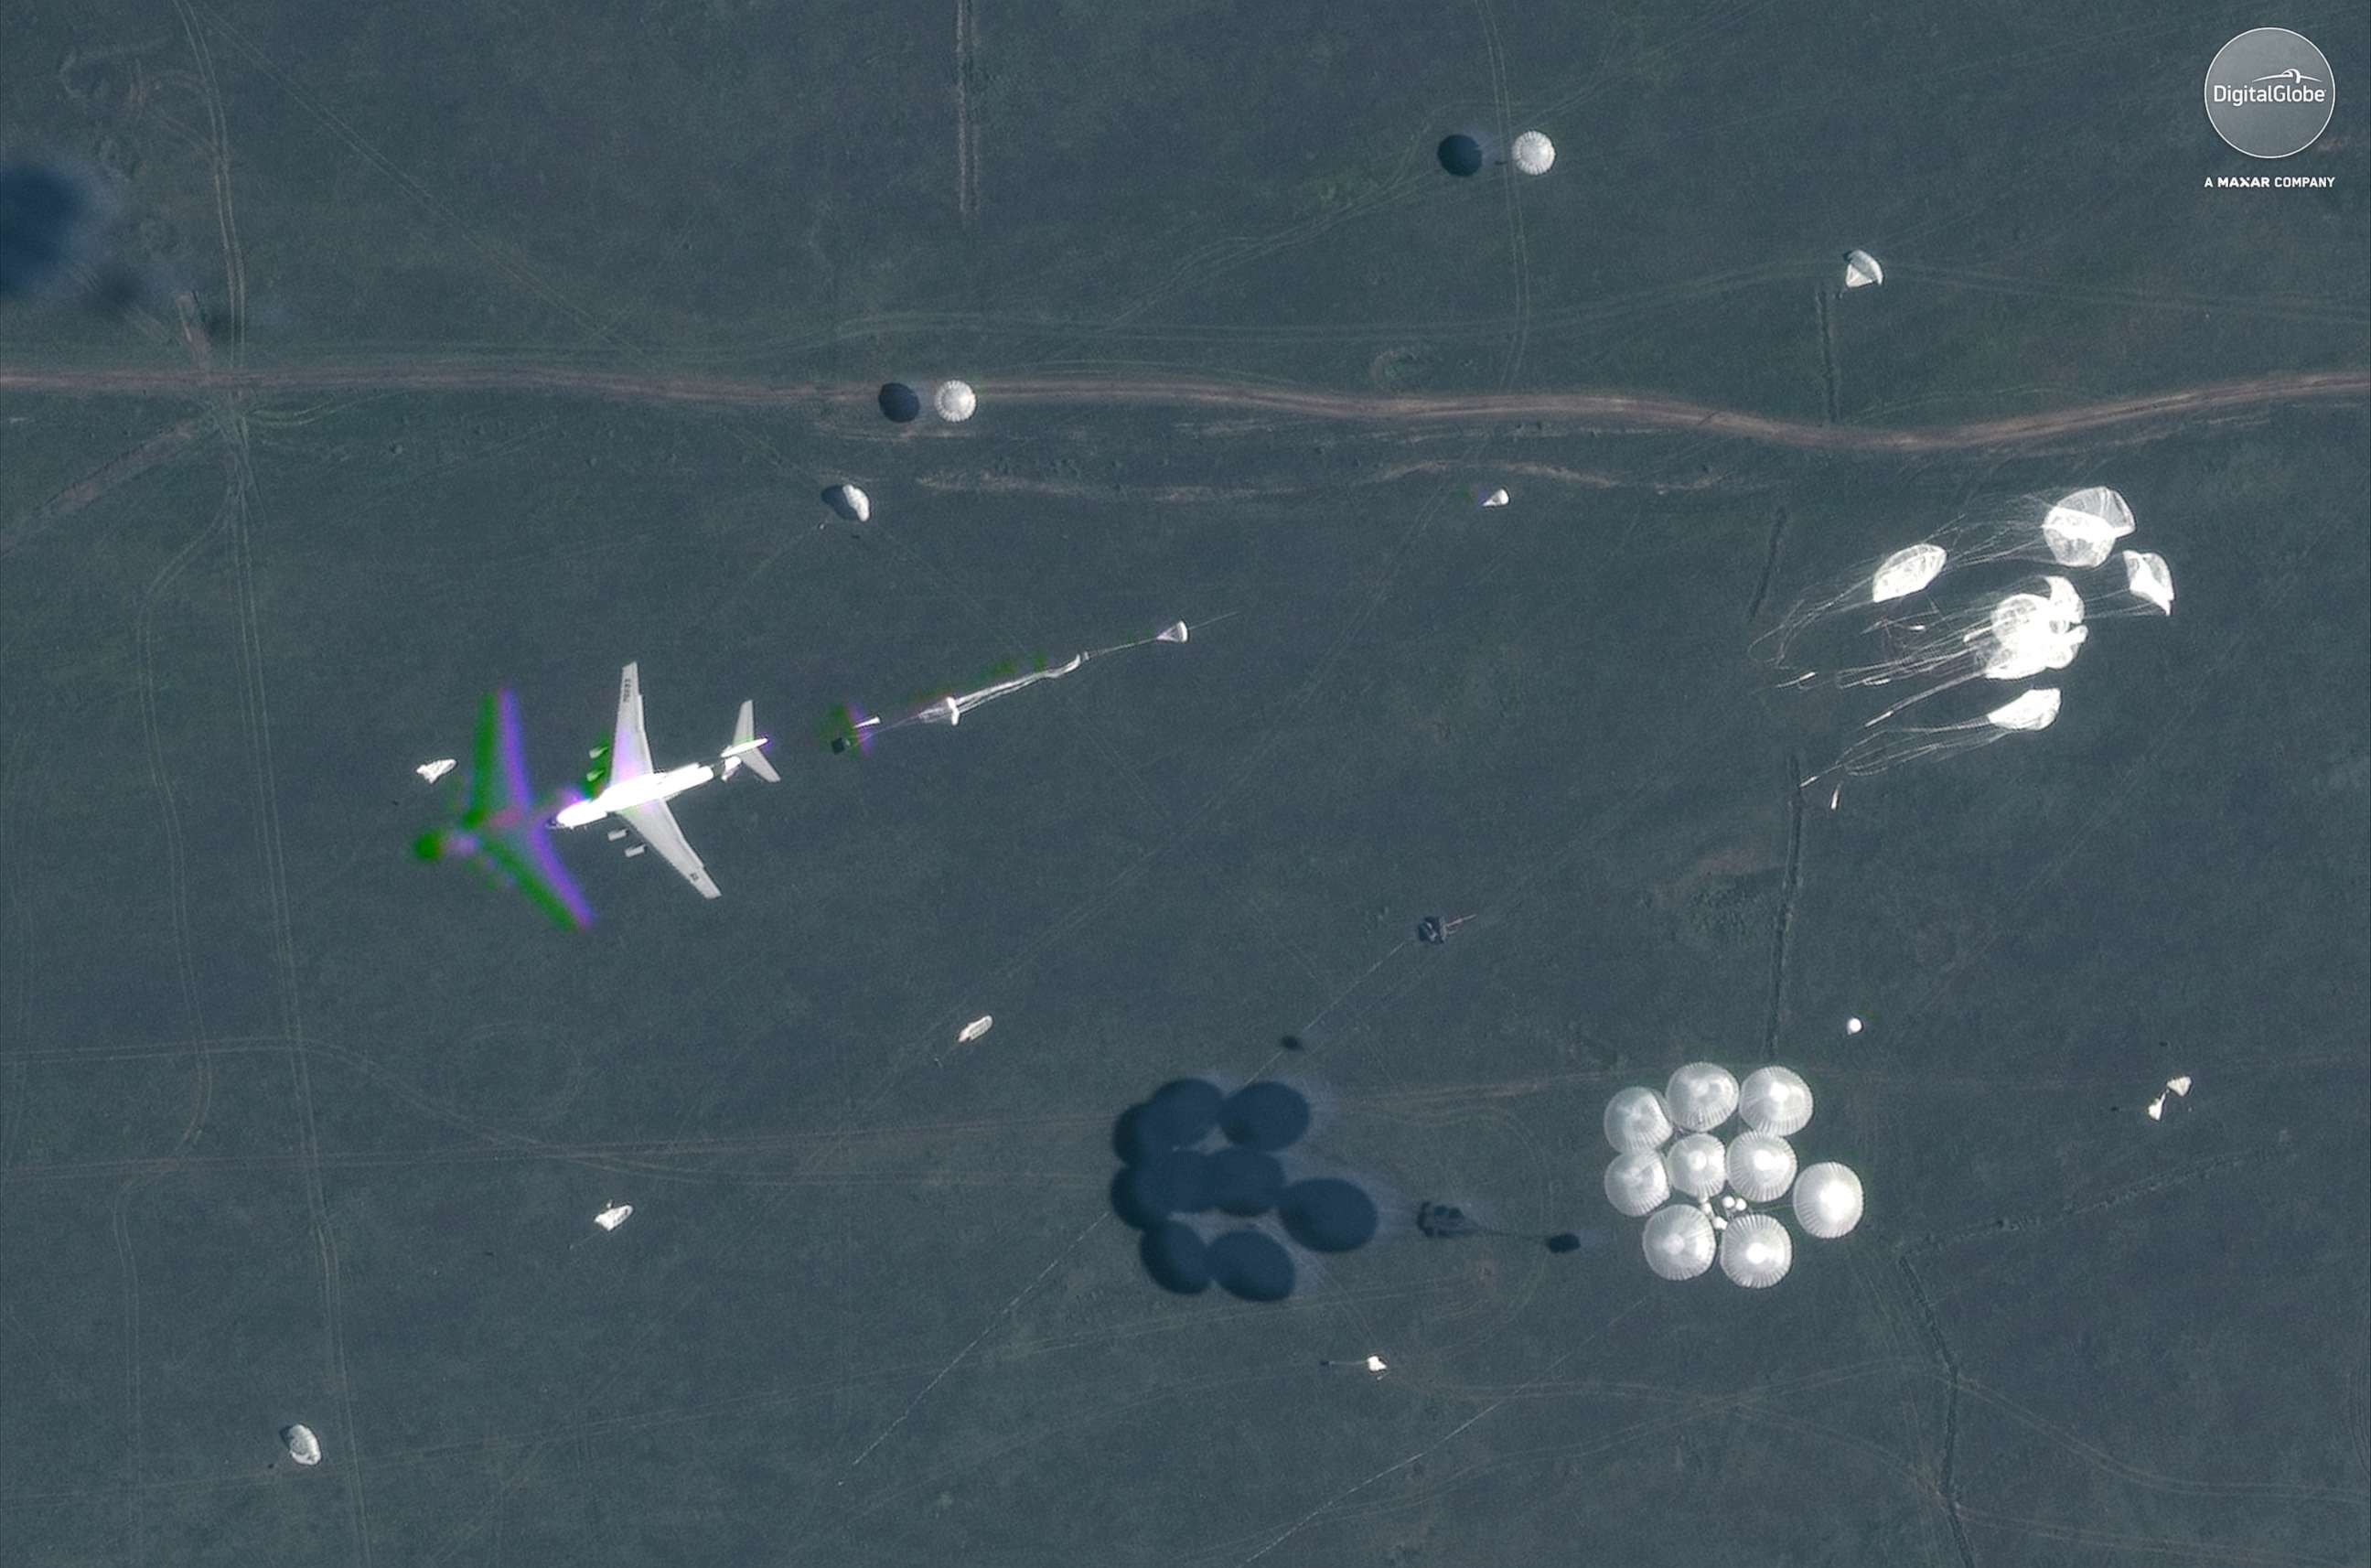 PHOTO: A satellite image shows parachutes deployed in midair during Russia's "Vostok 2018" military exercises in Tsugol, Russia, on Sep. 13, 2018.